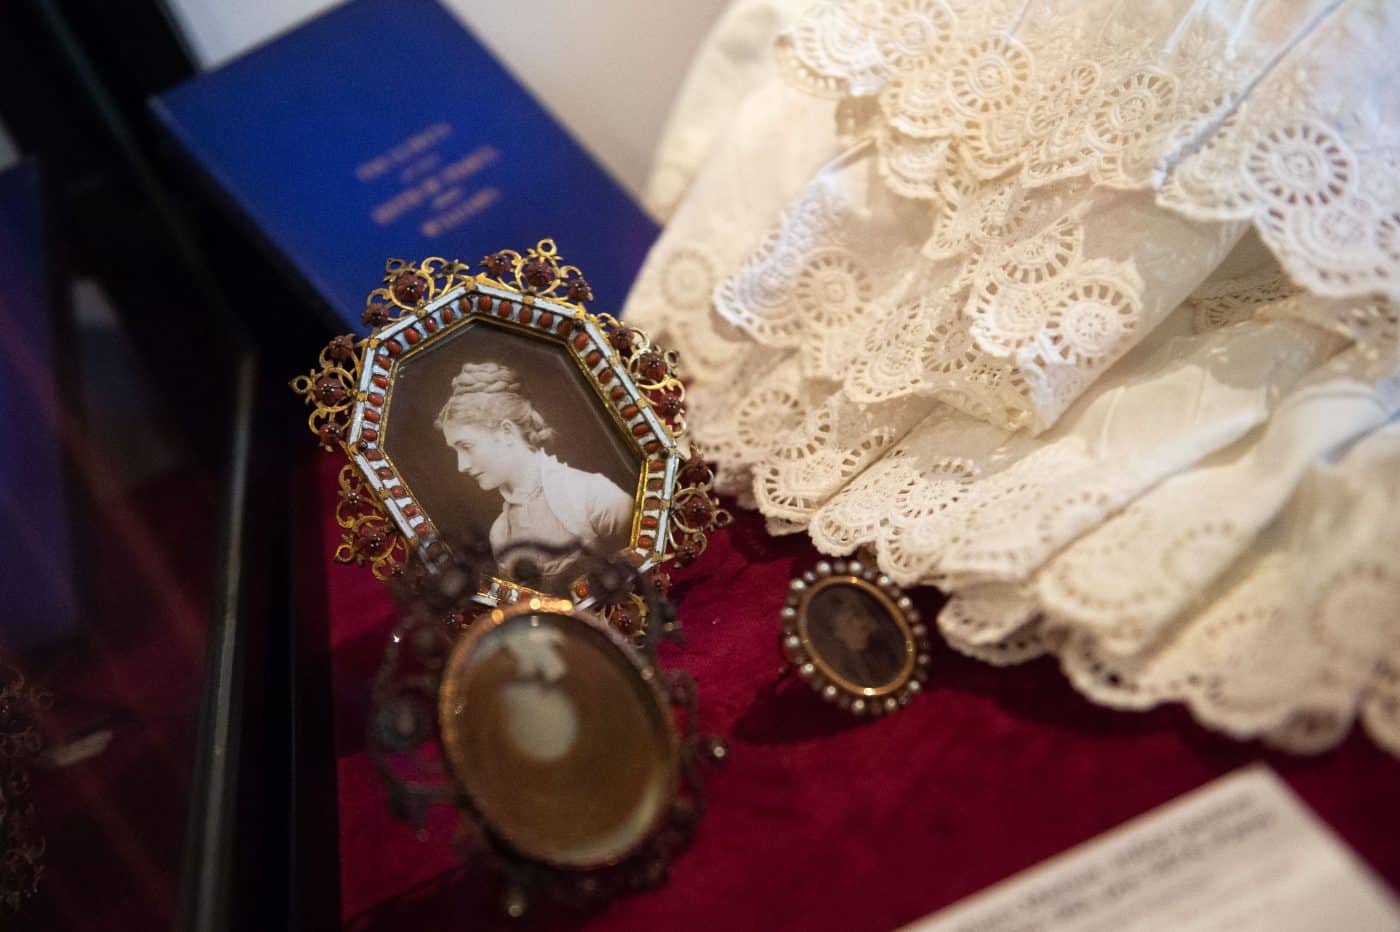 Small framed black-and-white family photos, lace and a blue-covered estate book in the Family Room at Waddesdon Manor part of the show "Alice's Wonderlands" about Alice de Rothschild in England